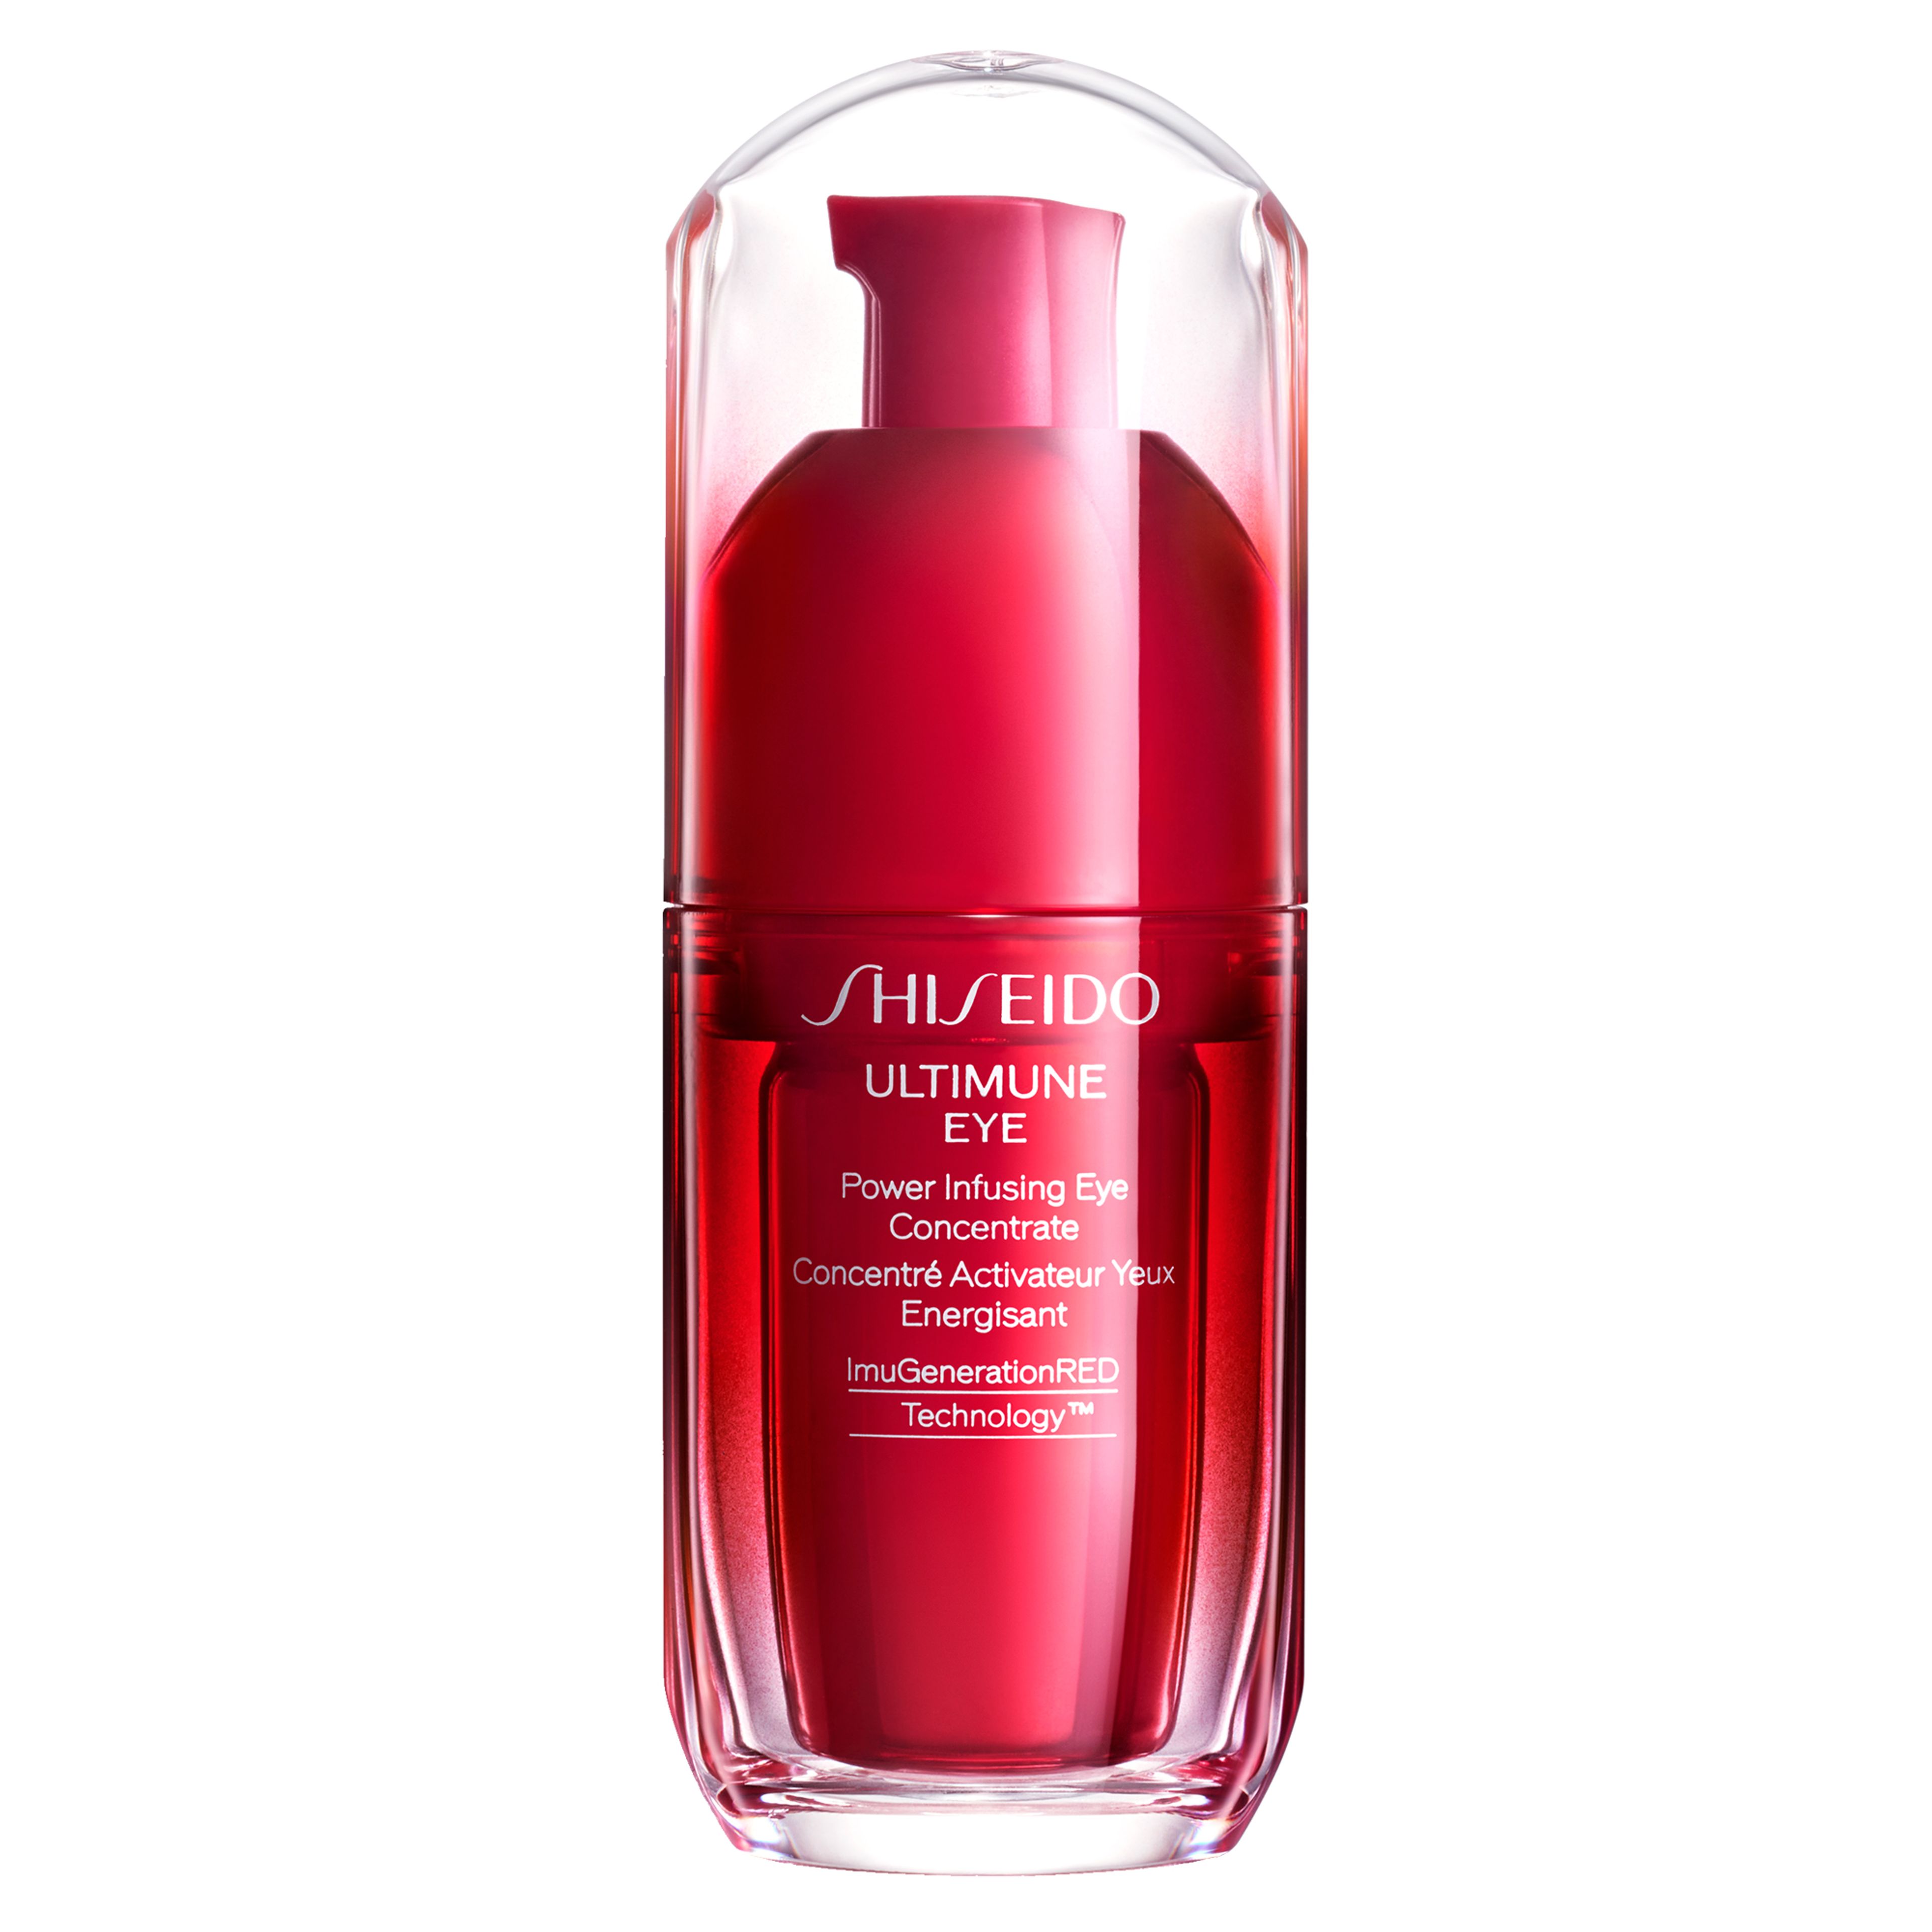 Shiseido Ultimune Power Infusing Eye Concentrate 1